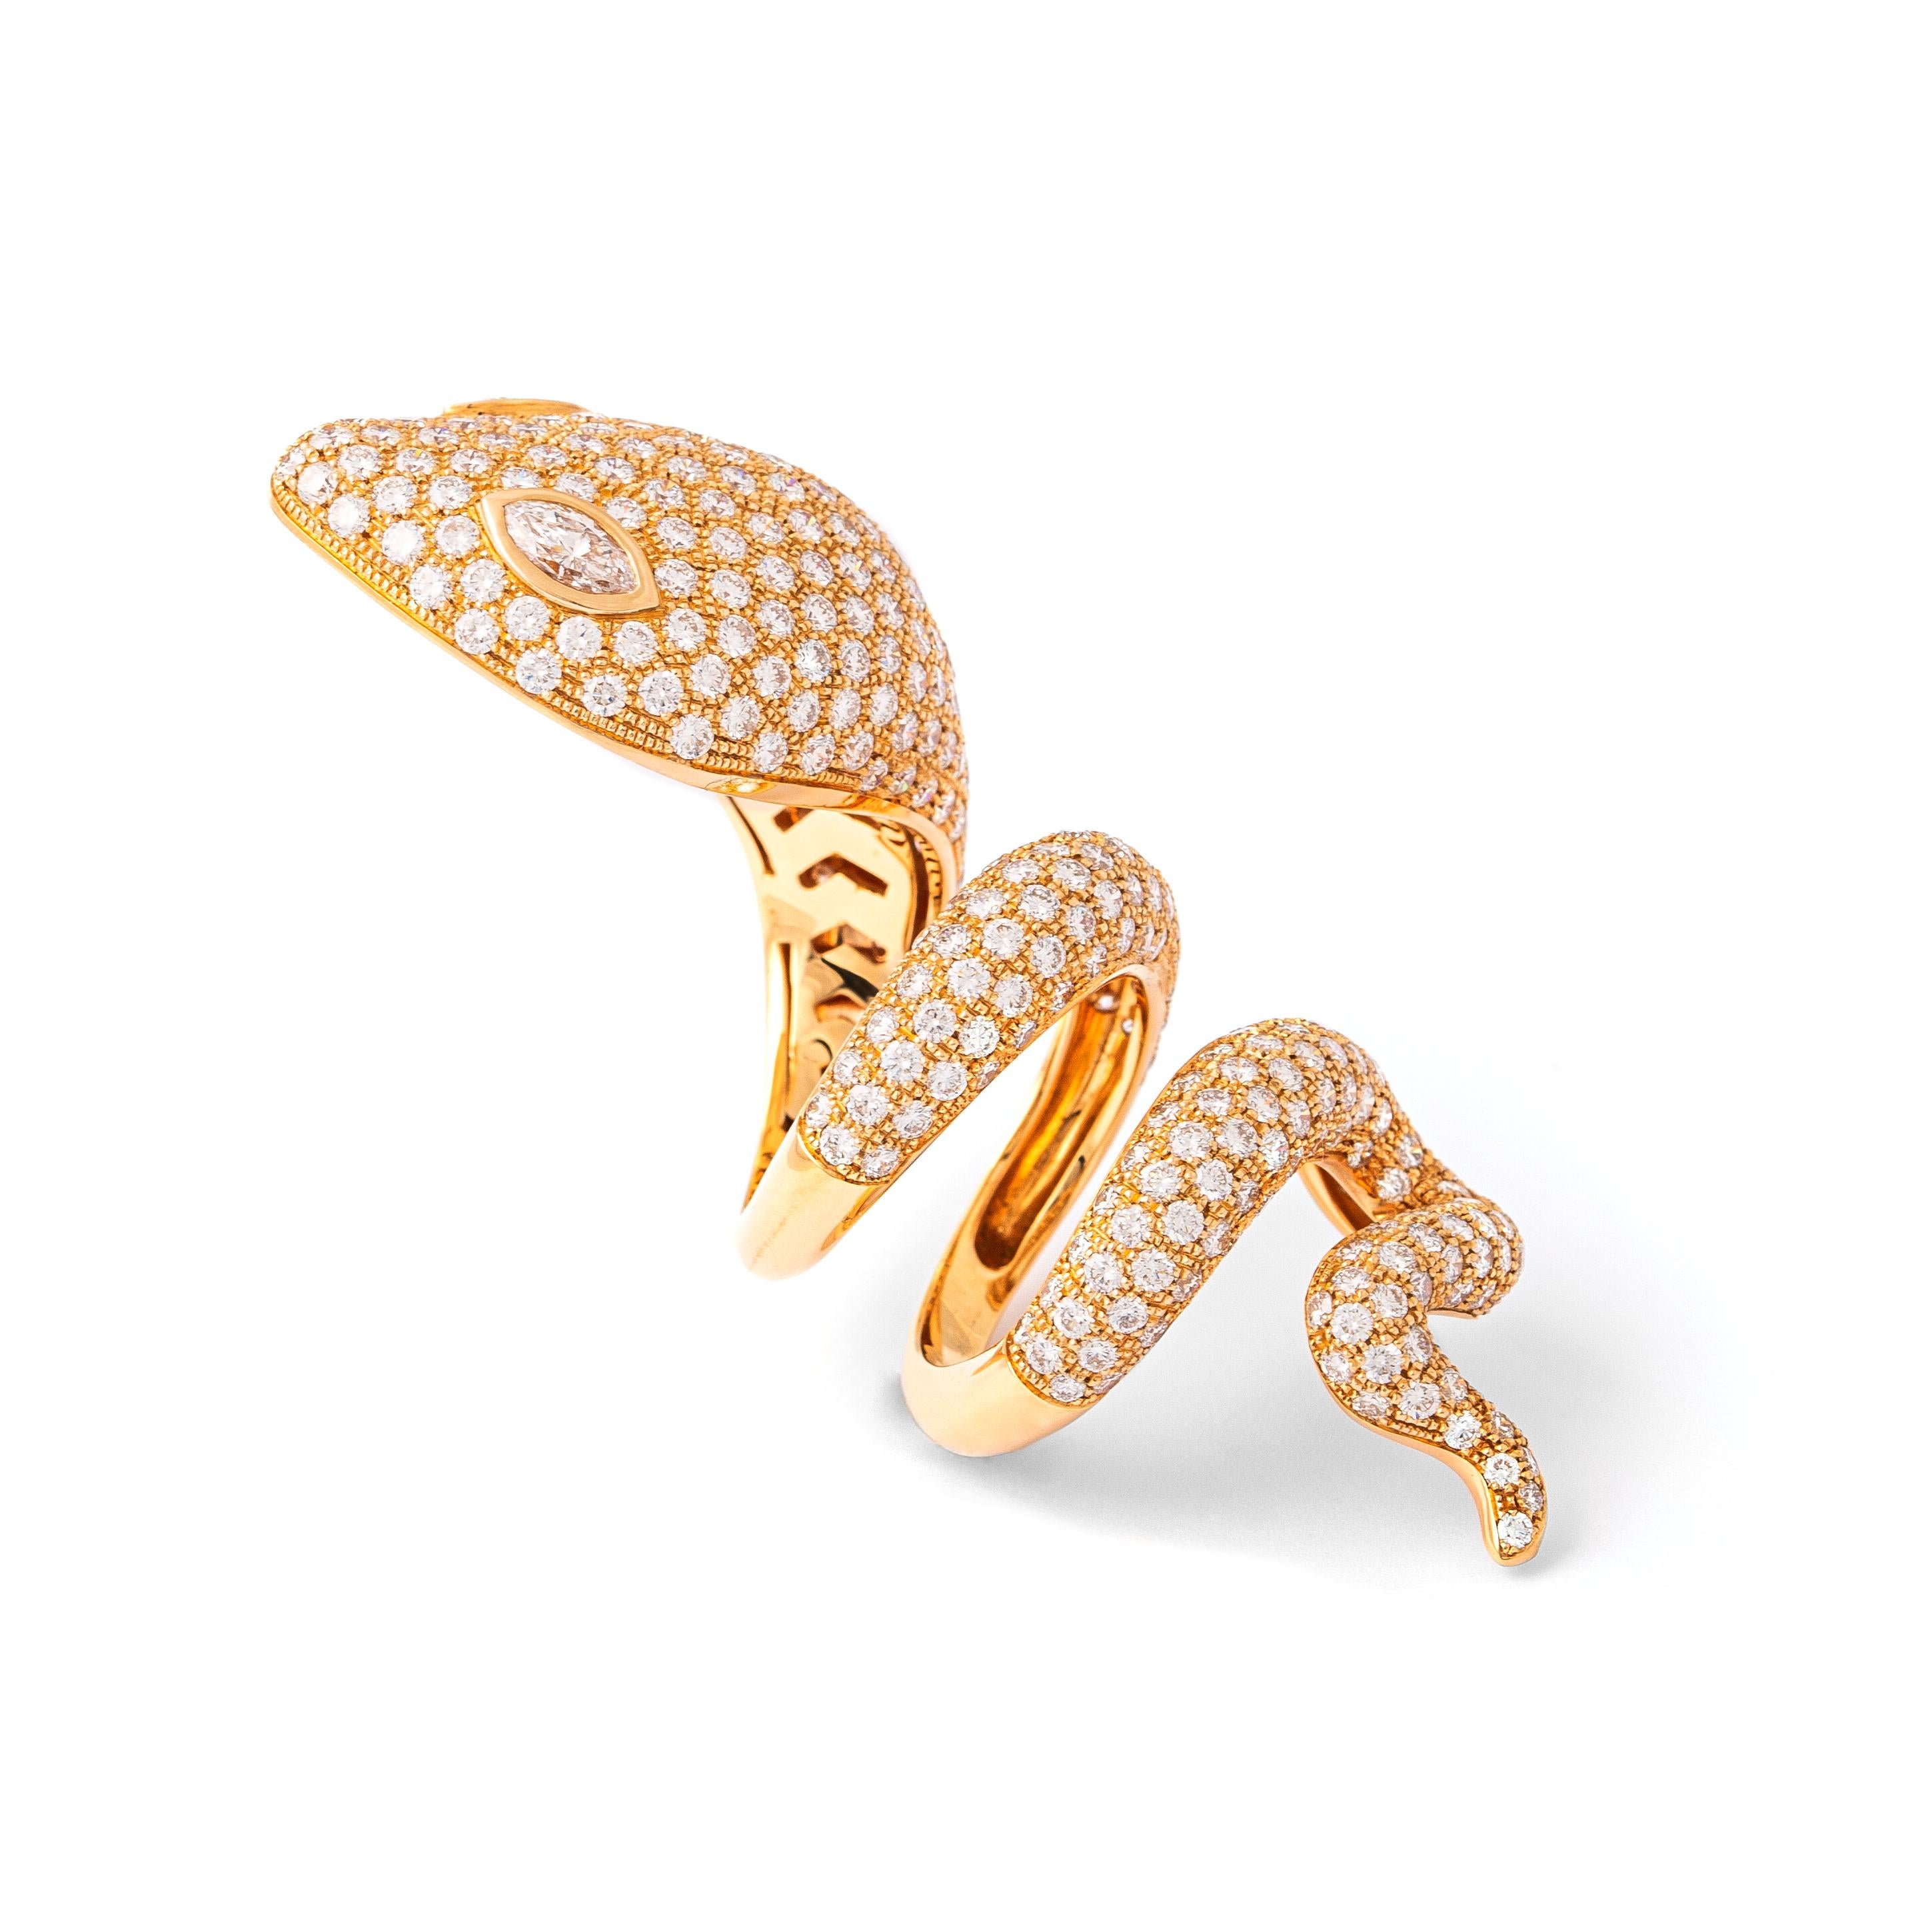 Snack ring in 18kt pink gold set with 376 diamonds 10.24 cts and 2 marquise cut daimonds 0.71 cts Size 56  

Length on the finger: 7 centimeters (2.76 inches)

Total weight: 30.99 grams.      